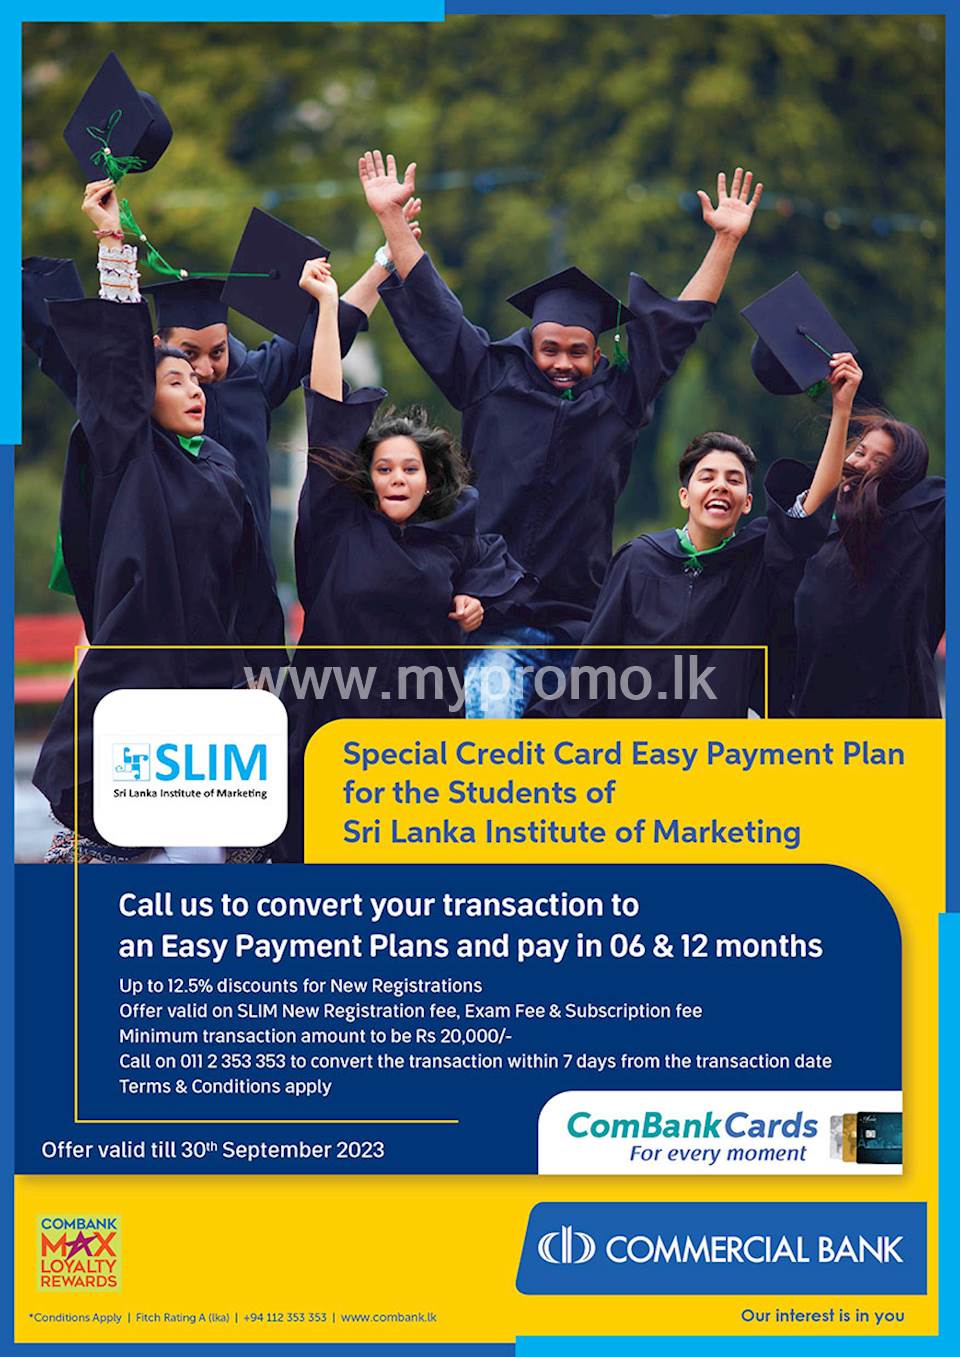 Special Credit Card Easy Payment Plan for the student of Sri Lanka Institute of Marketing